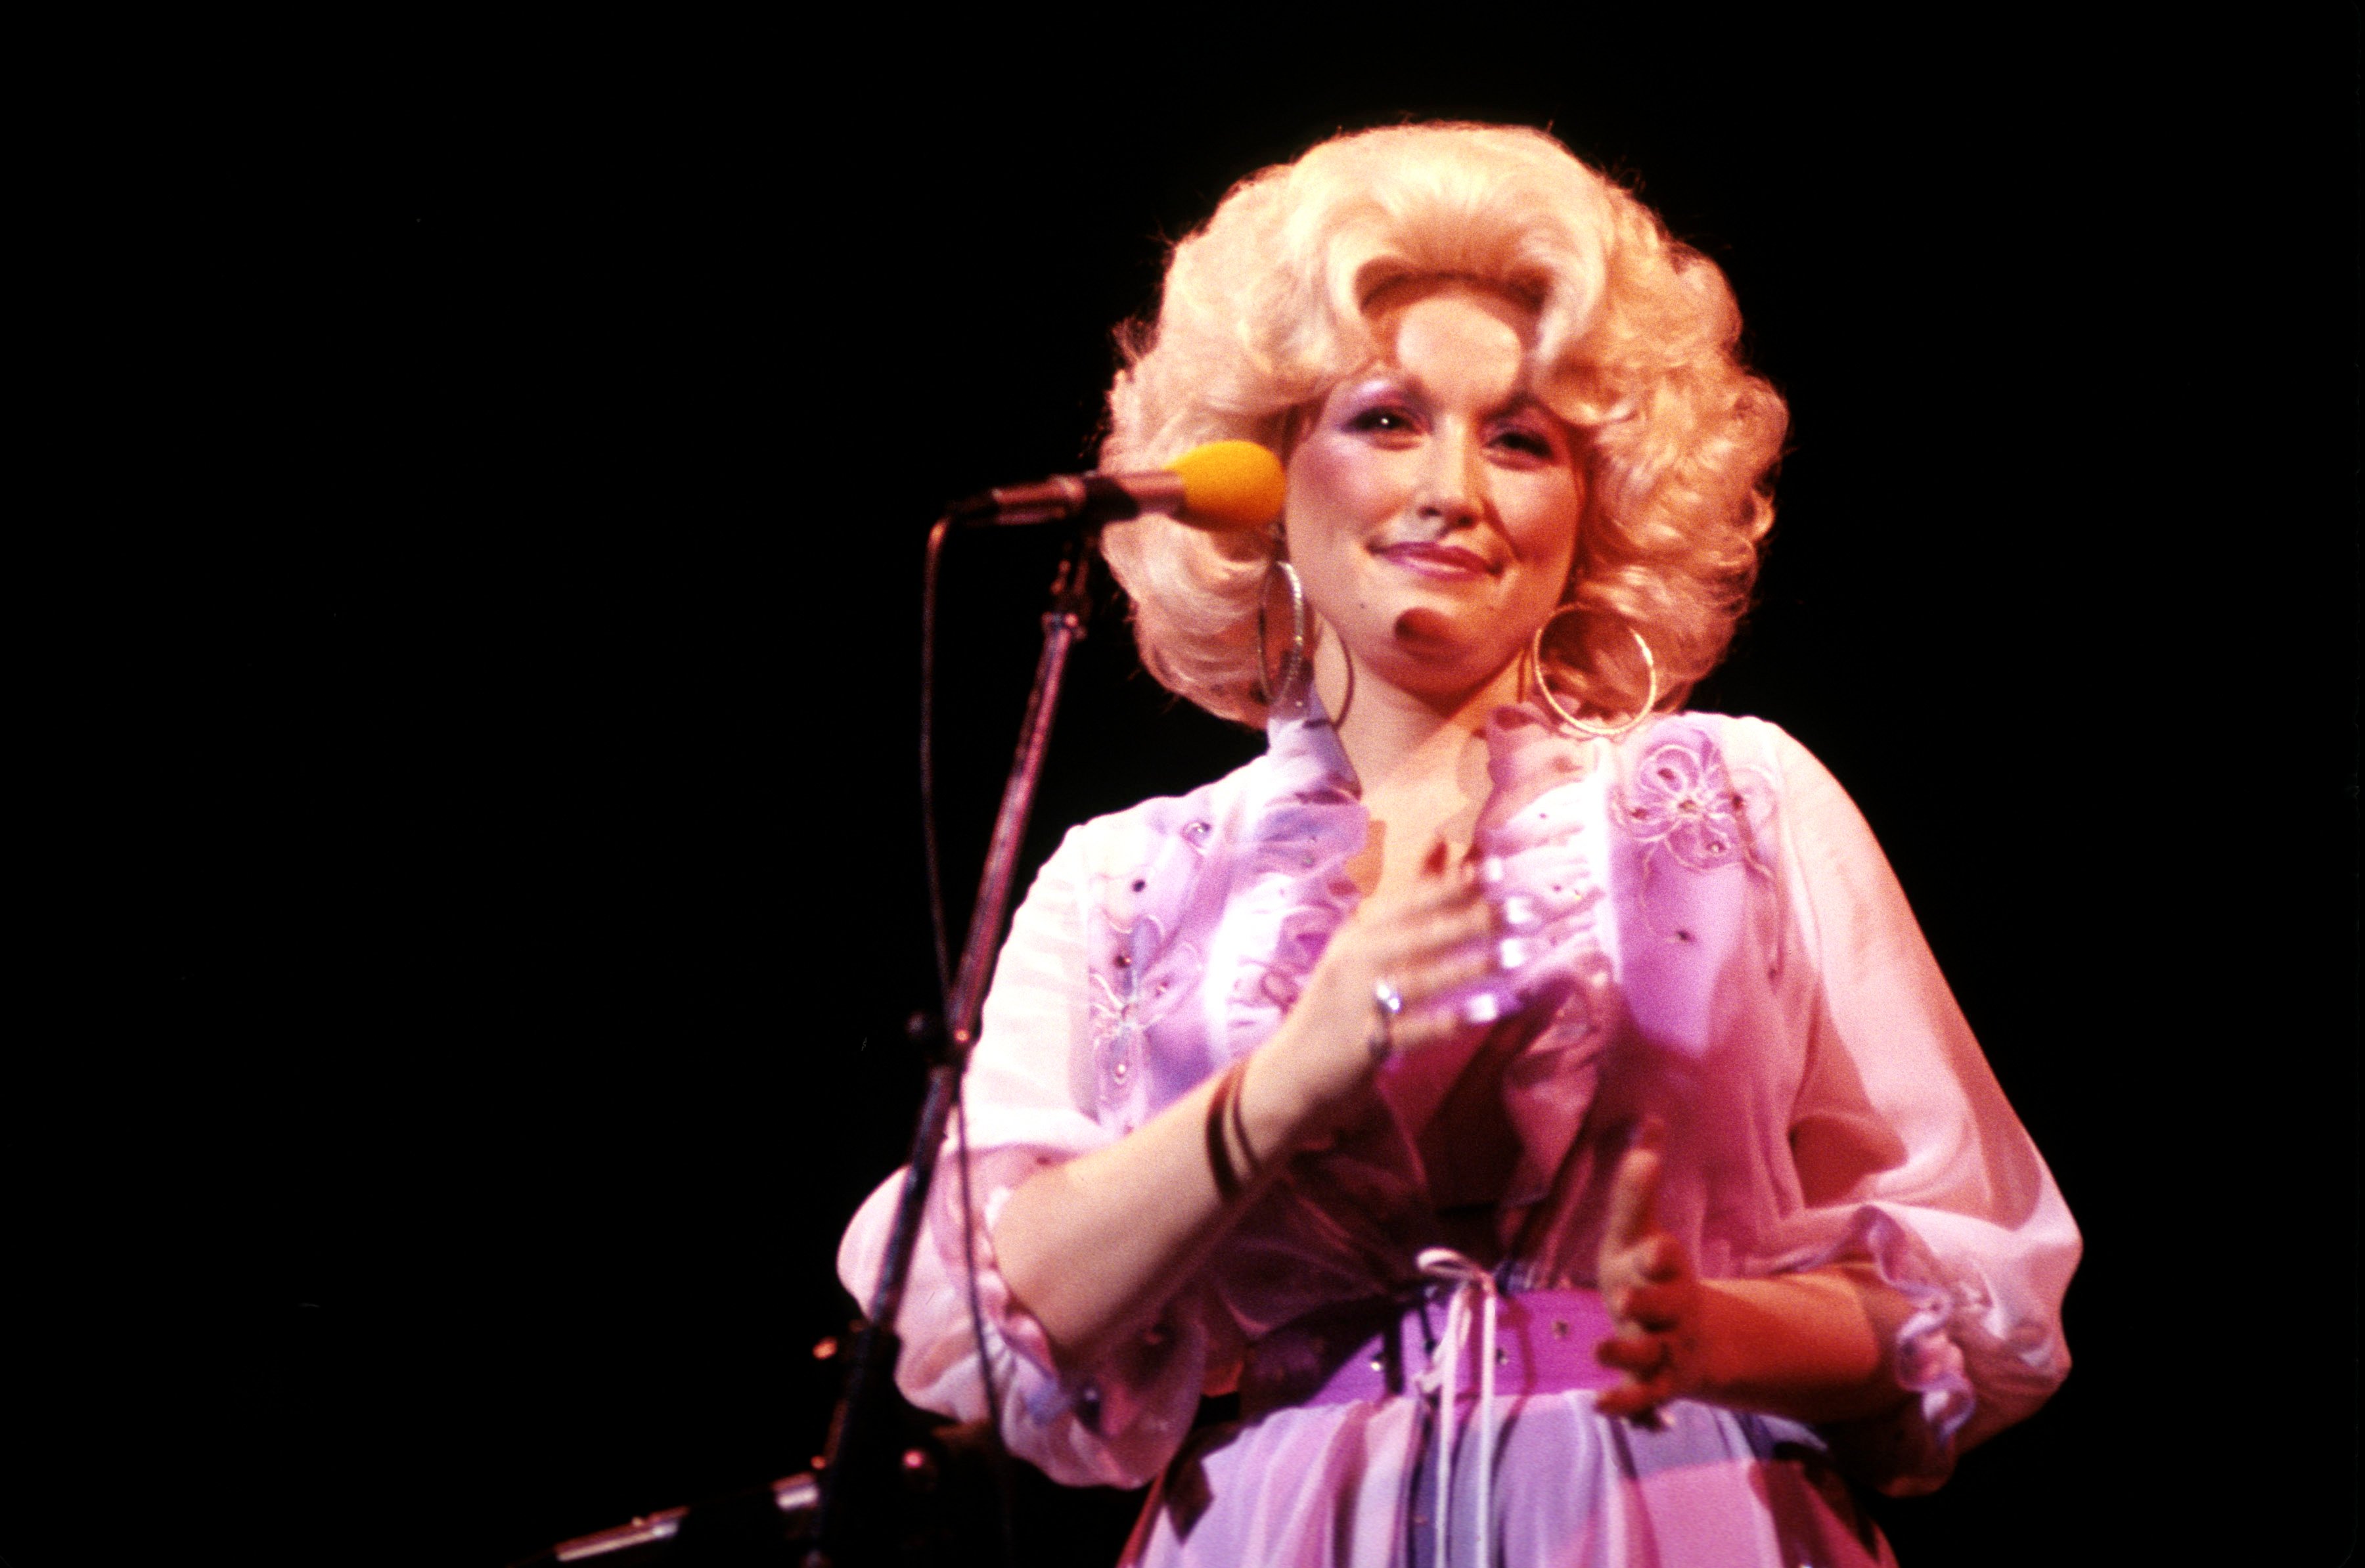 Dolly Parton on stage in a purple dress.